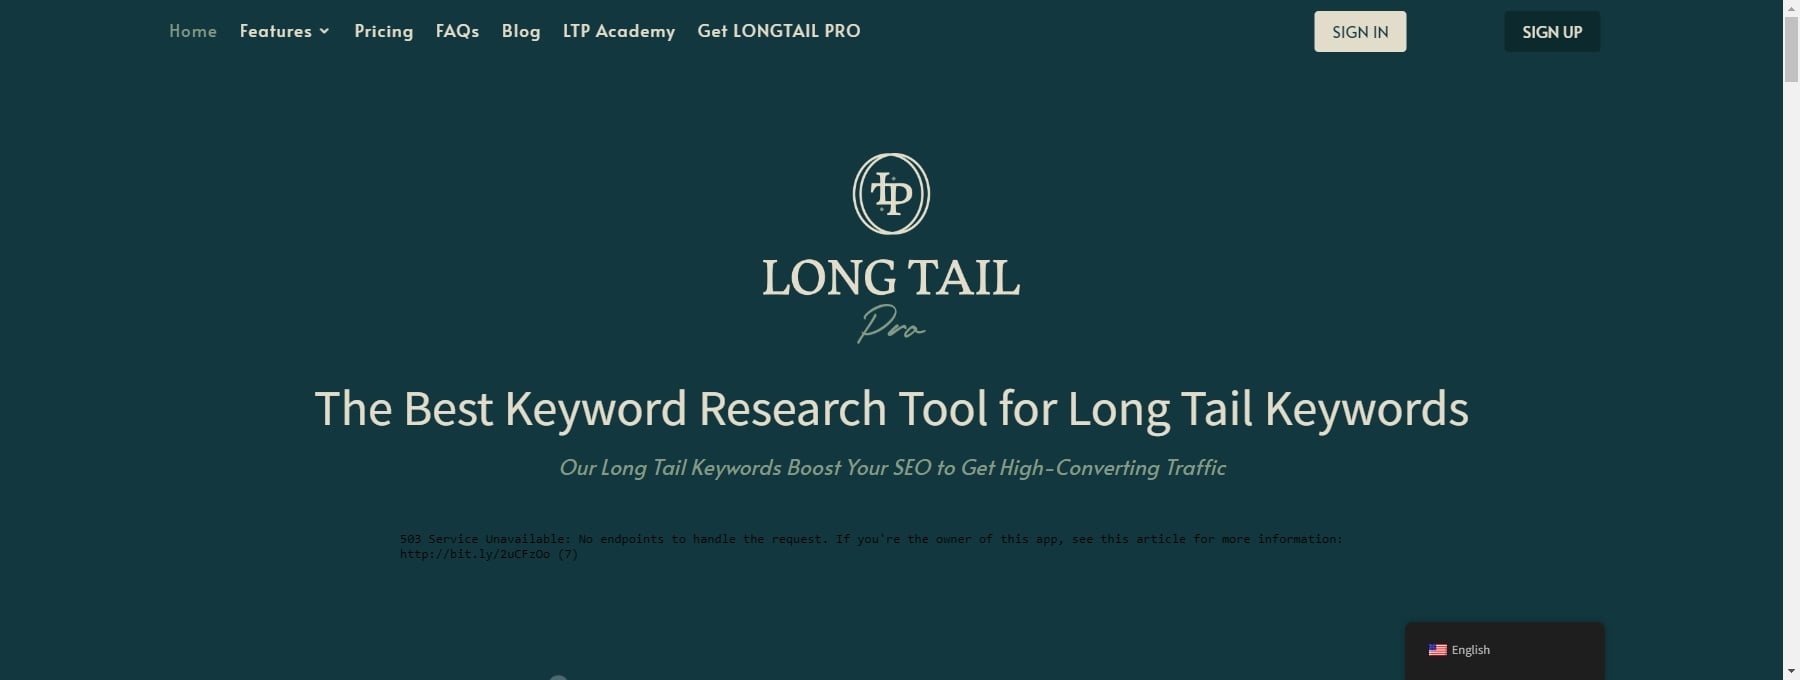 LongTail Pro Keyword Research Tools